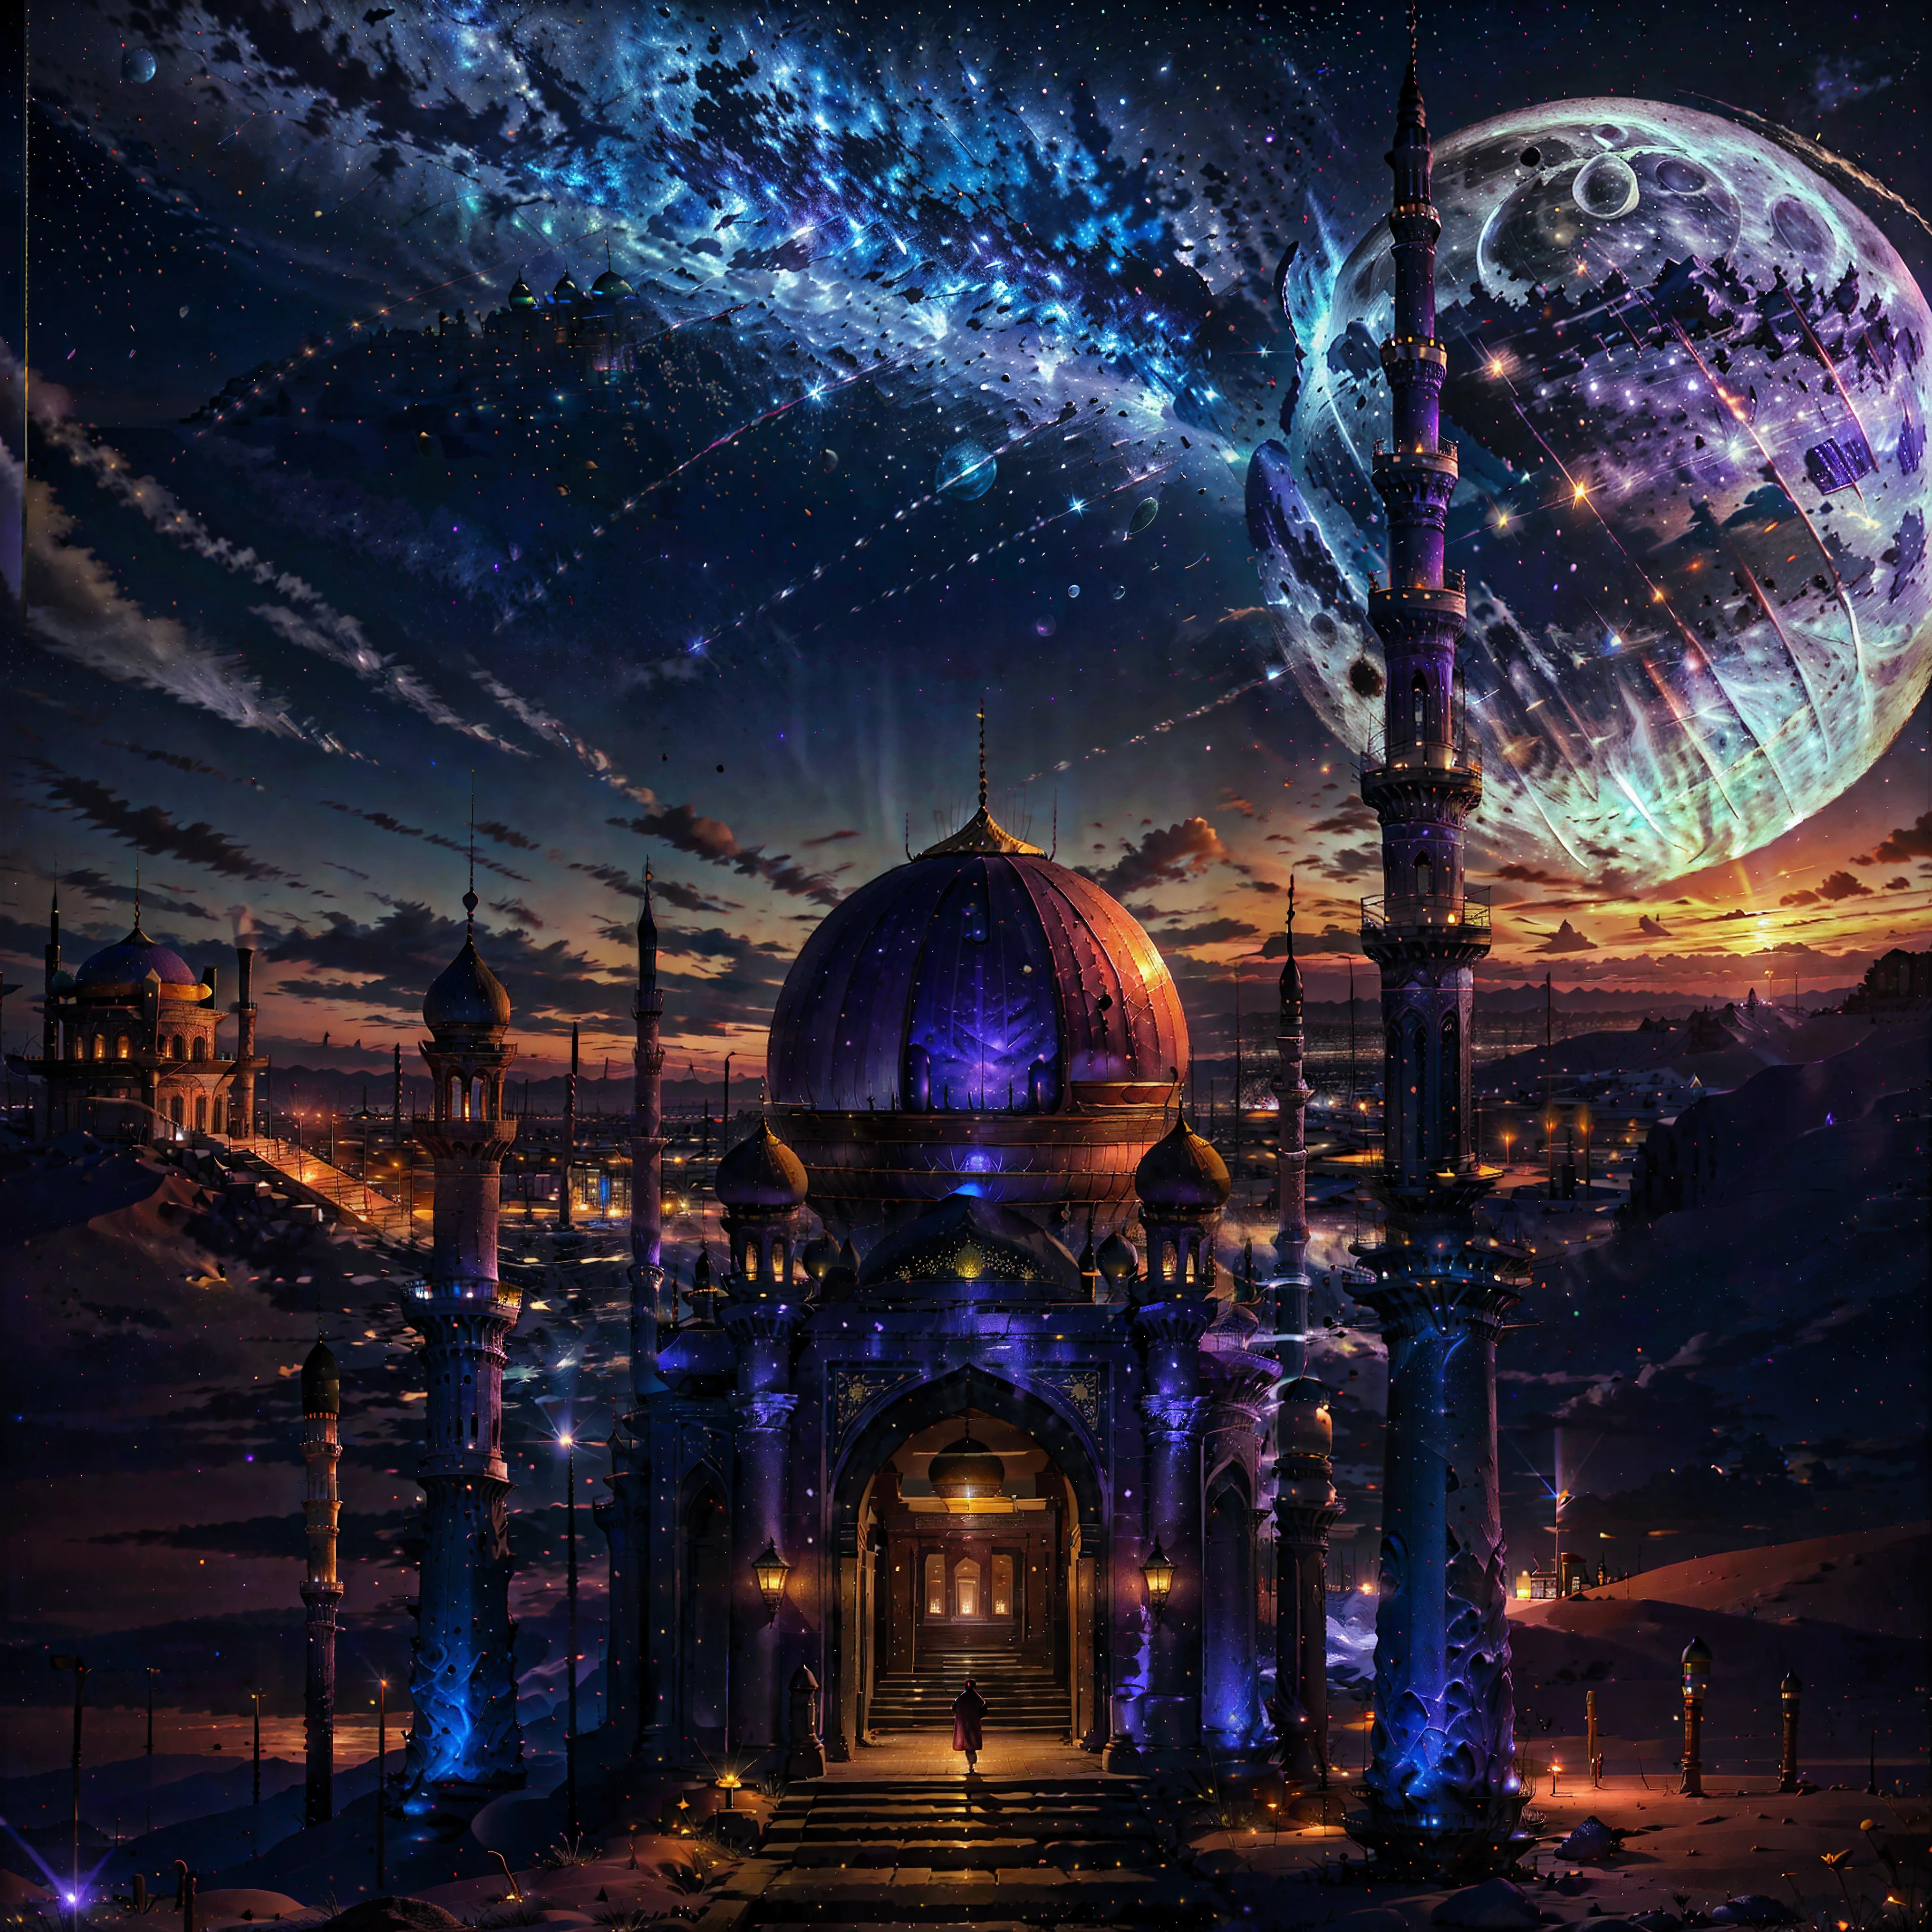 islamic mosque、　big purple moon、　desert landscape、　Beauty New Gradient、　night sky full of shining stars、　bright colors of the moon and stars、　Combination of warm and cool colors、　and a fantastic atmosphere、　god々New